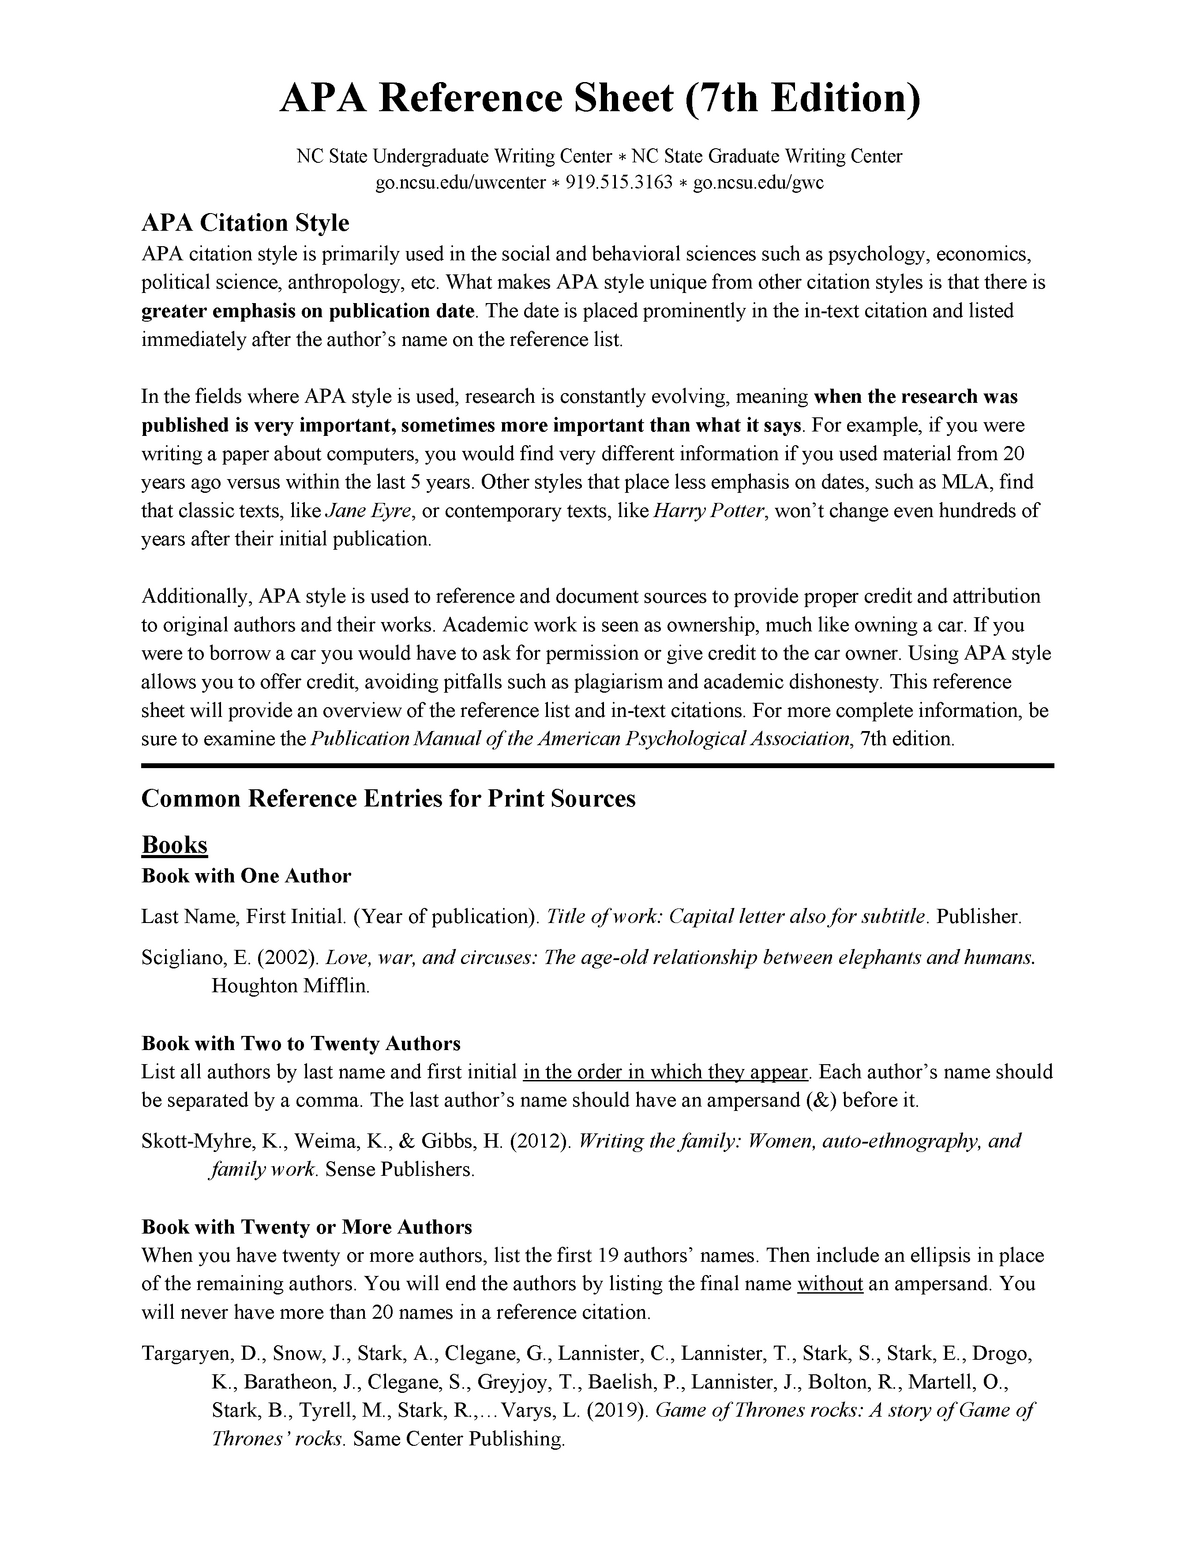 Common Citations and References in APA Style (7th Ed.) – Purdue